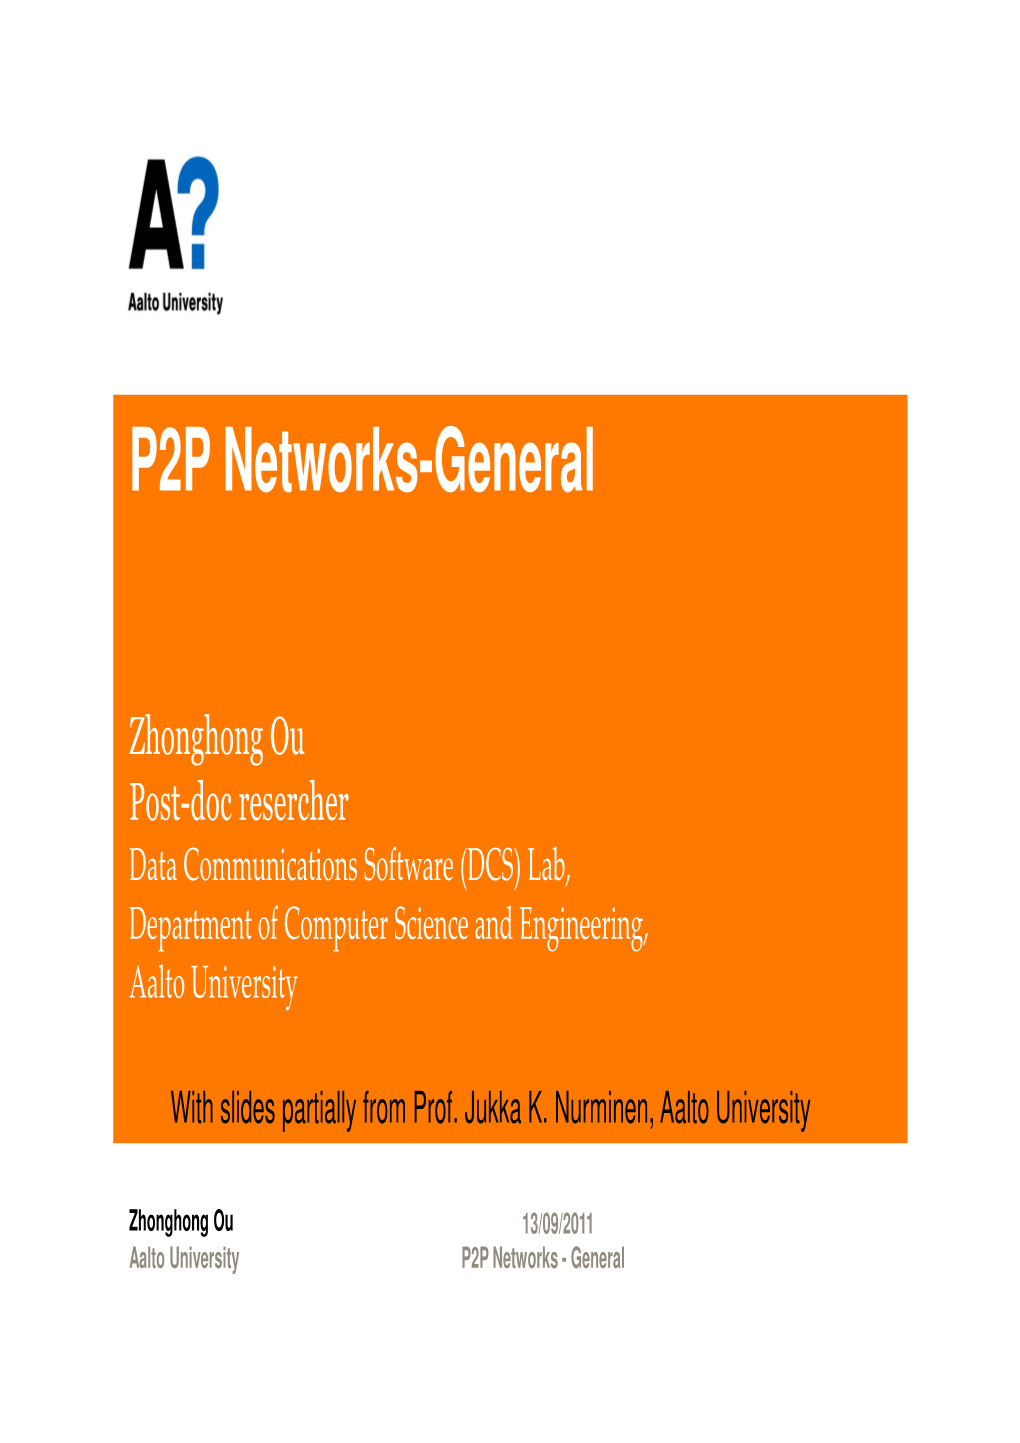 P2P Networks-General